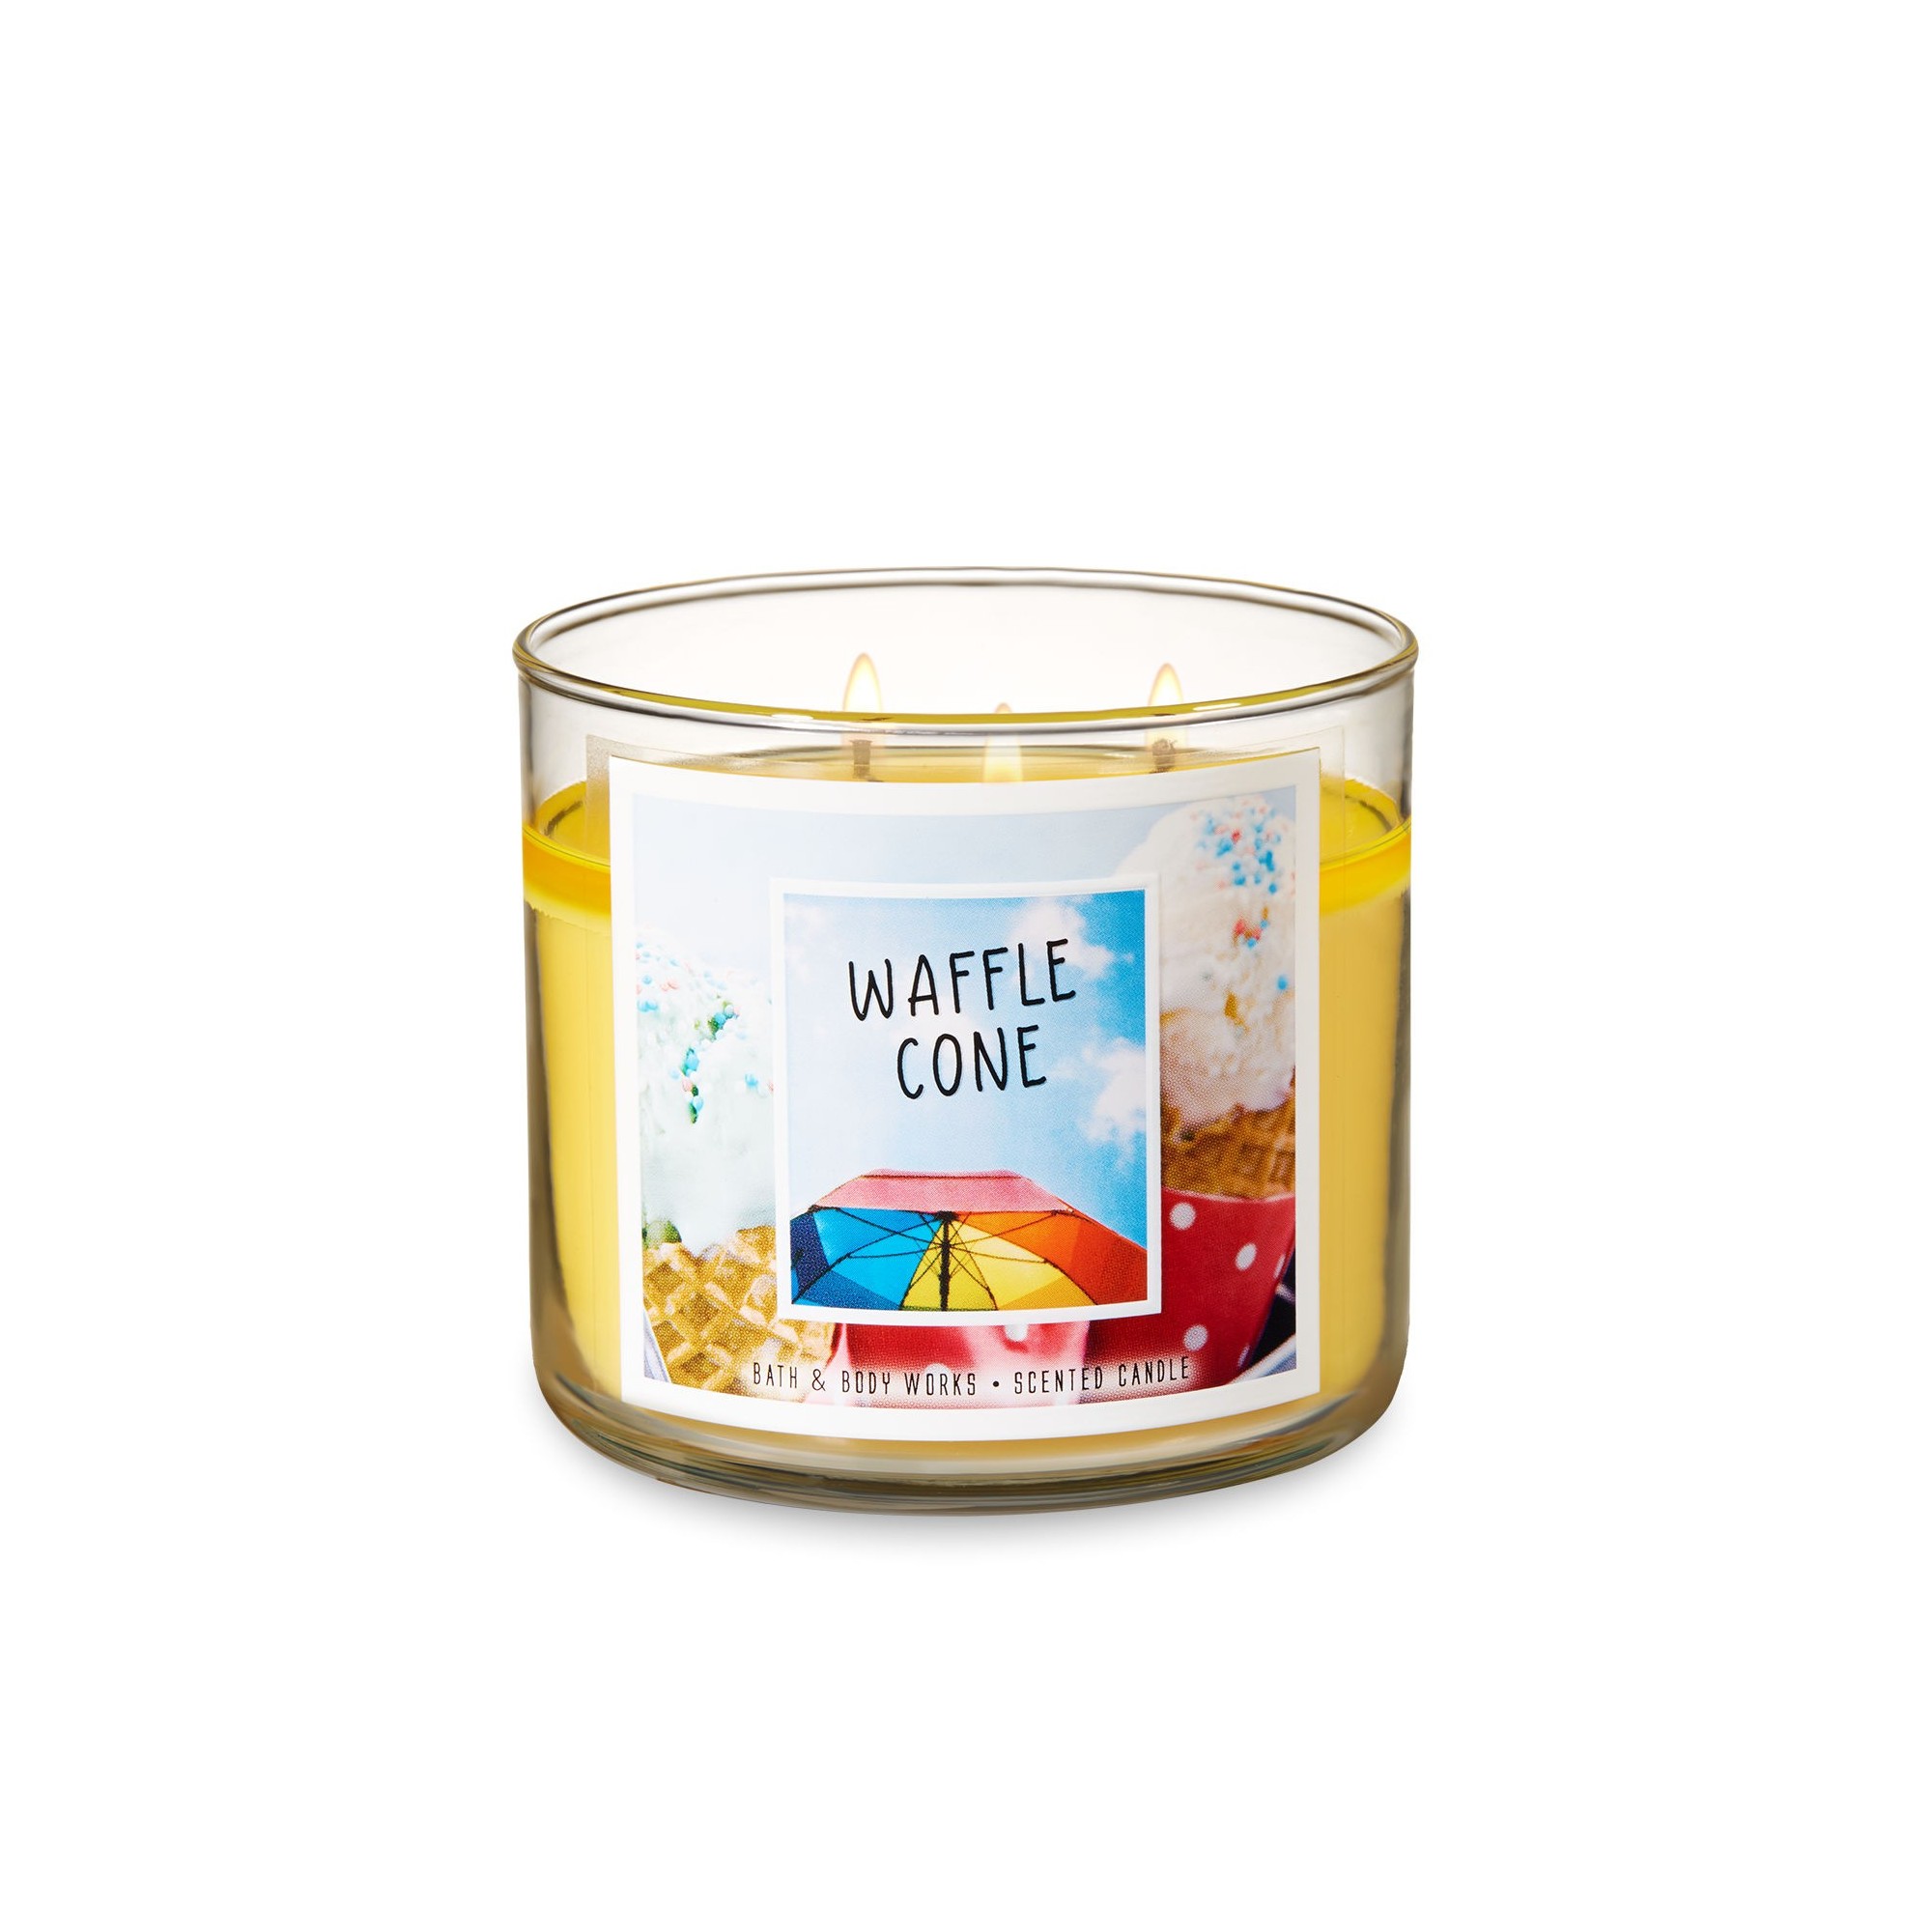 Bath & Body Works Waffle Cone 3 Wick Scented Candle